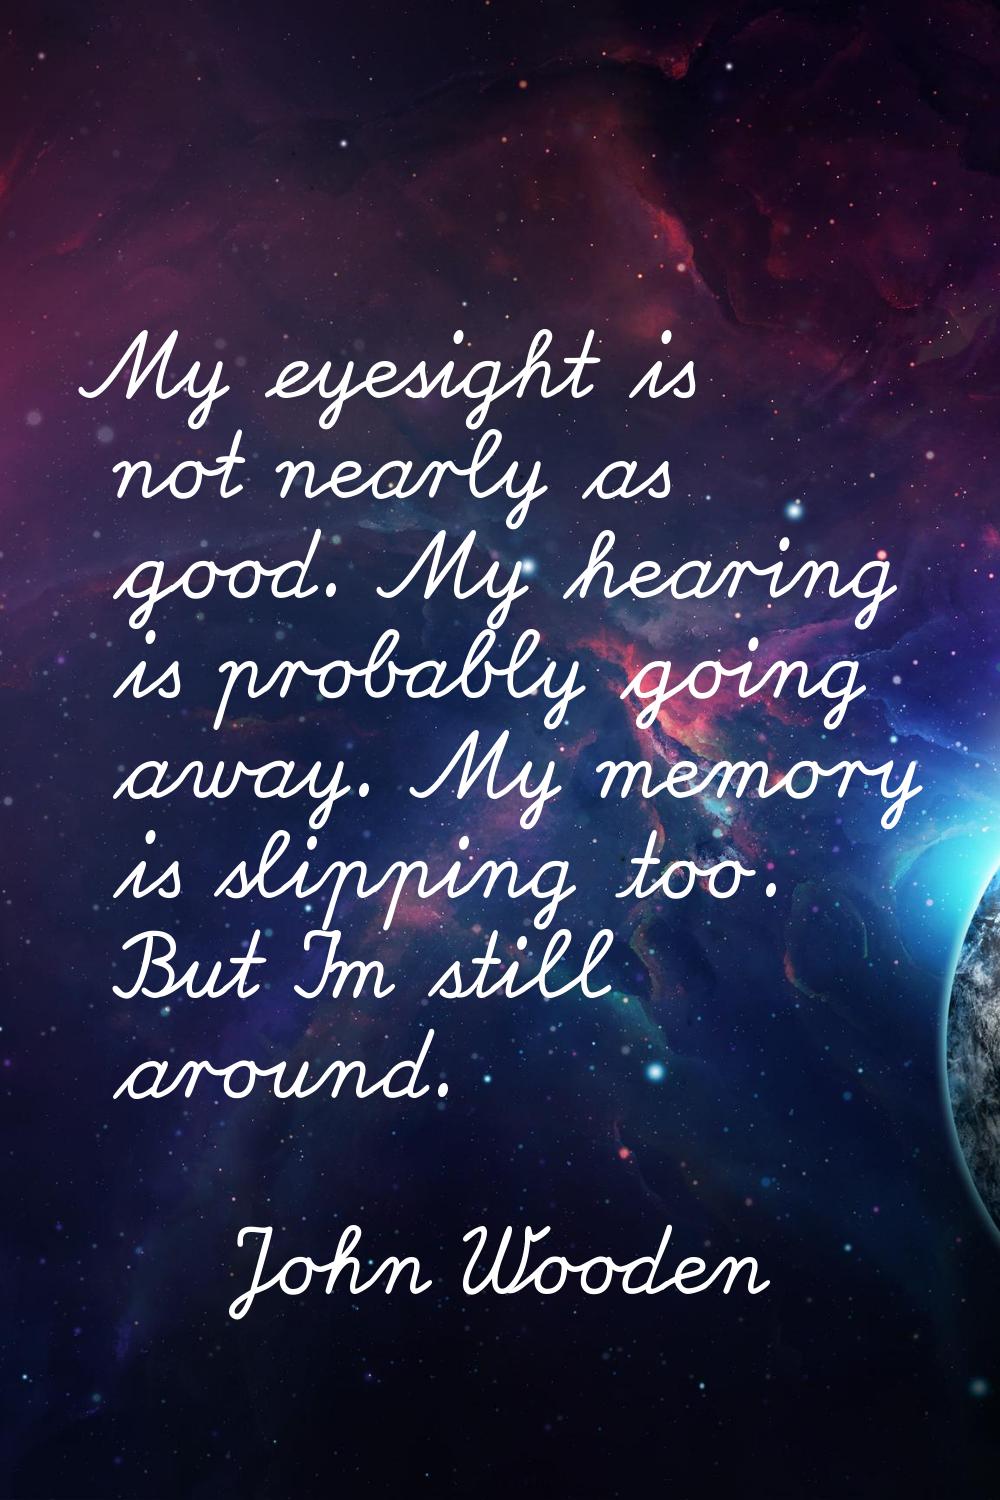 My eyesight is not nearly as good. My hearing is probably going away. My memory is slipping too. Bu